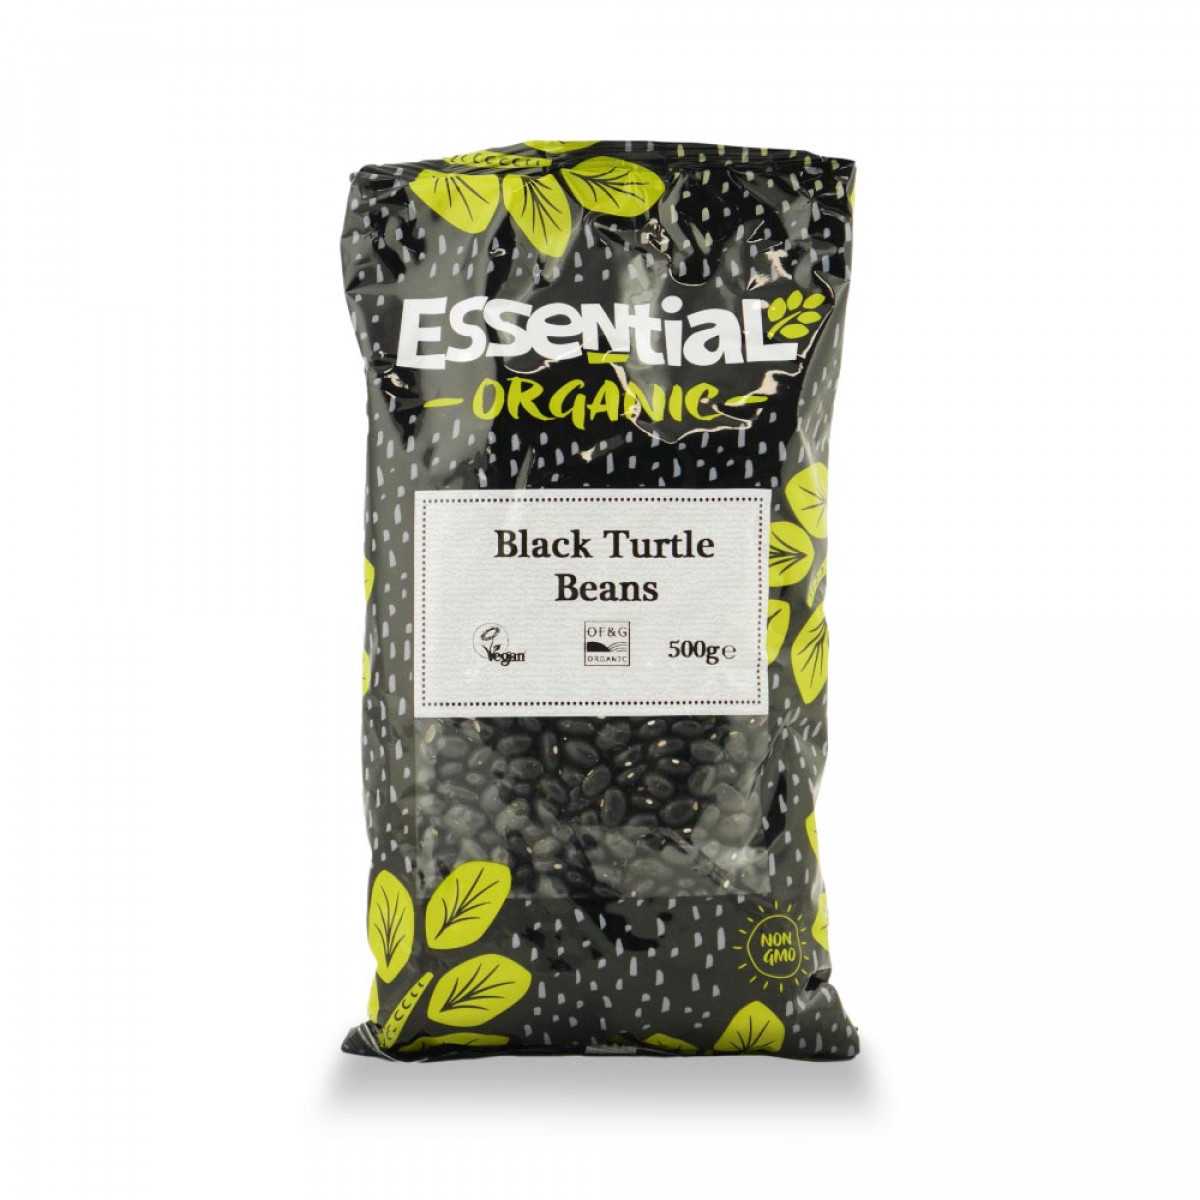 Product picture for Black Turtle Beans